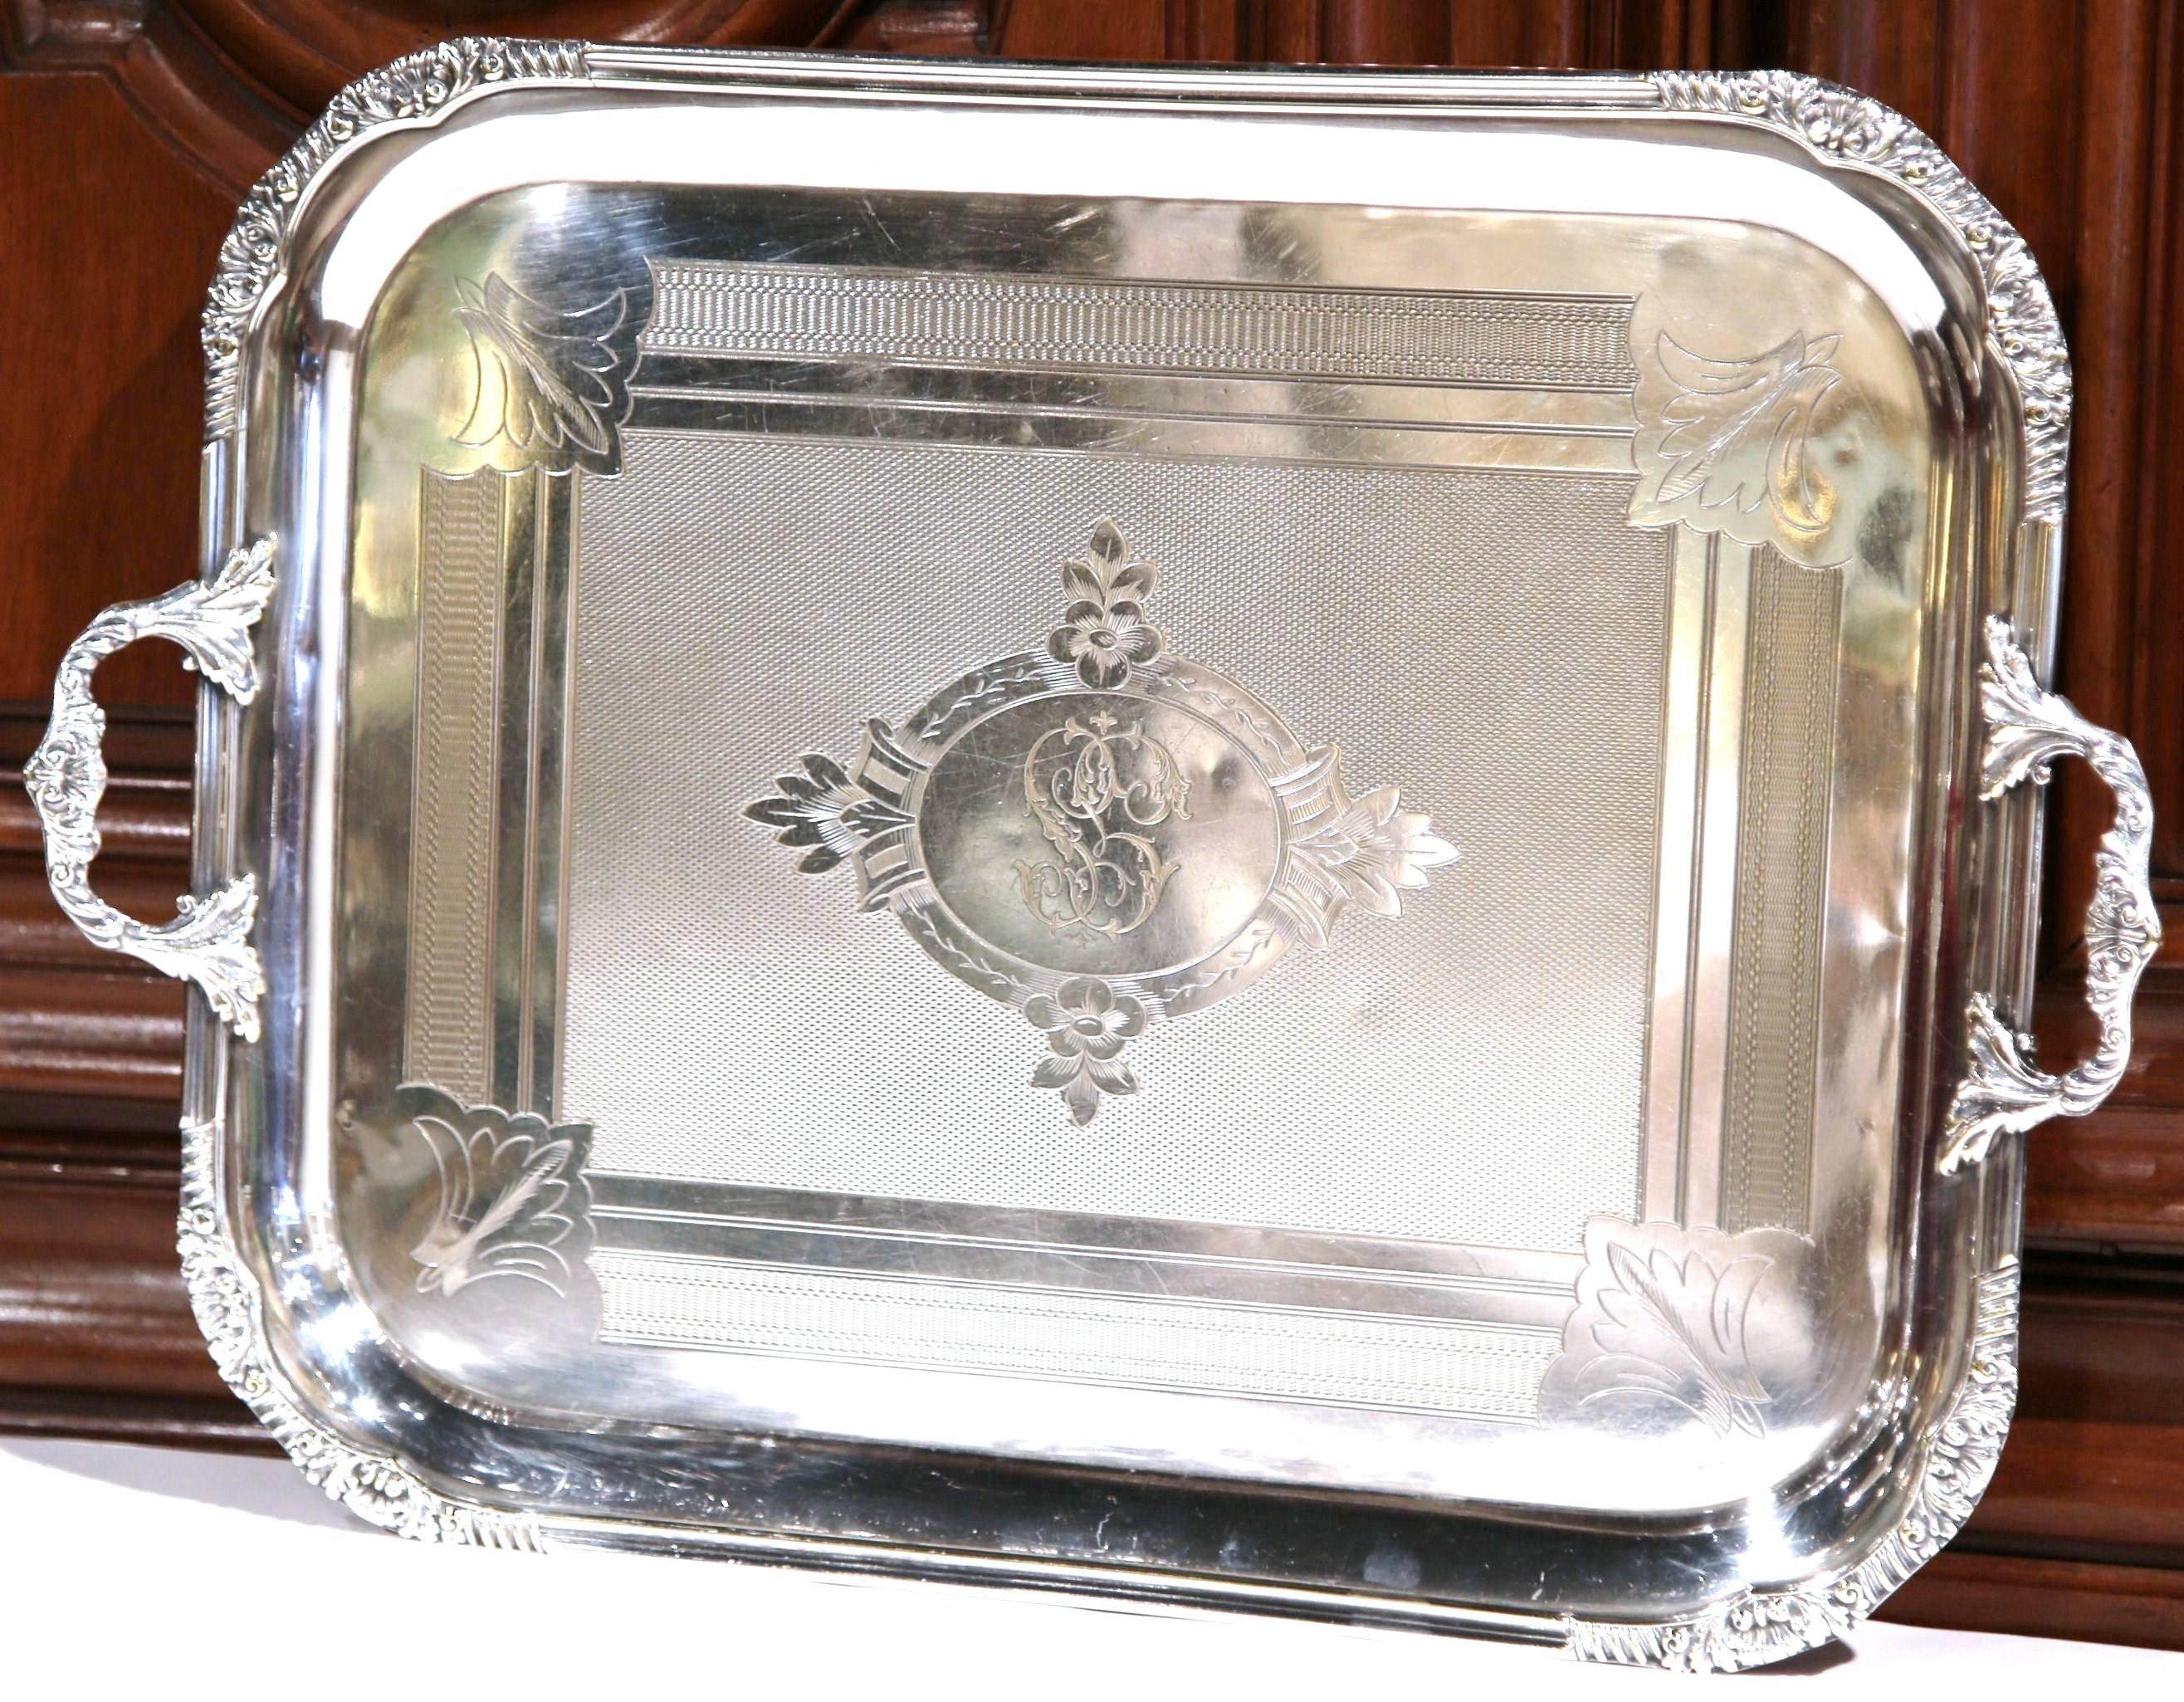 This elegant antique tray was created in France, circa 1880. The silver plated serving piece features two handles with intricate scroll work, repousse motifs in each corner including the traditional Louis XV shell, and an engraved center medallion